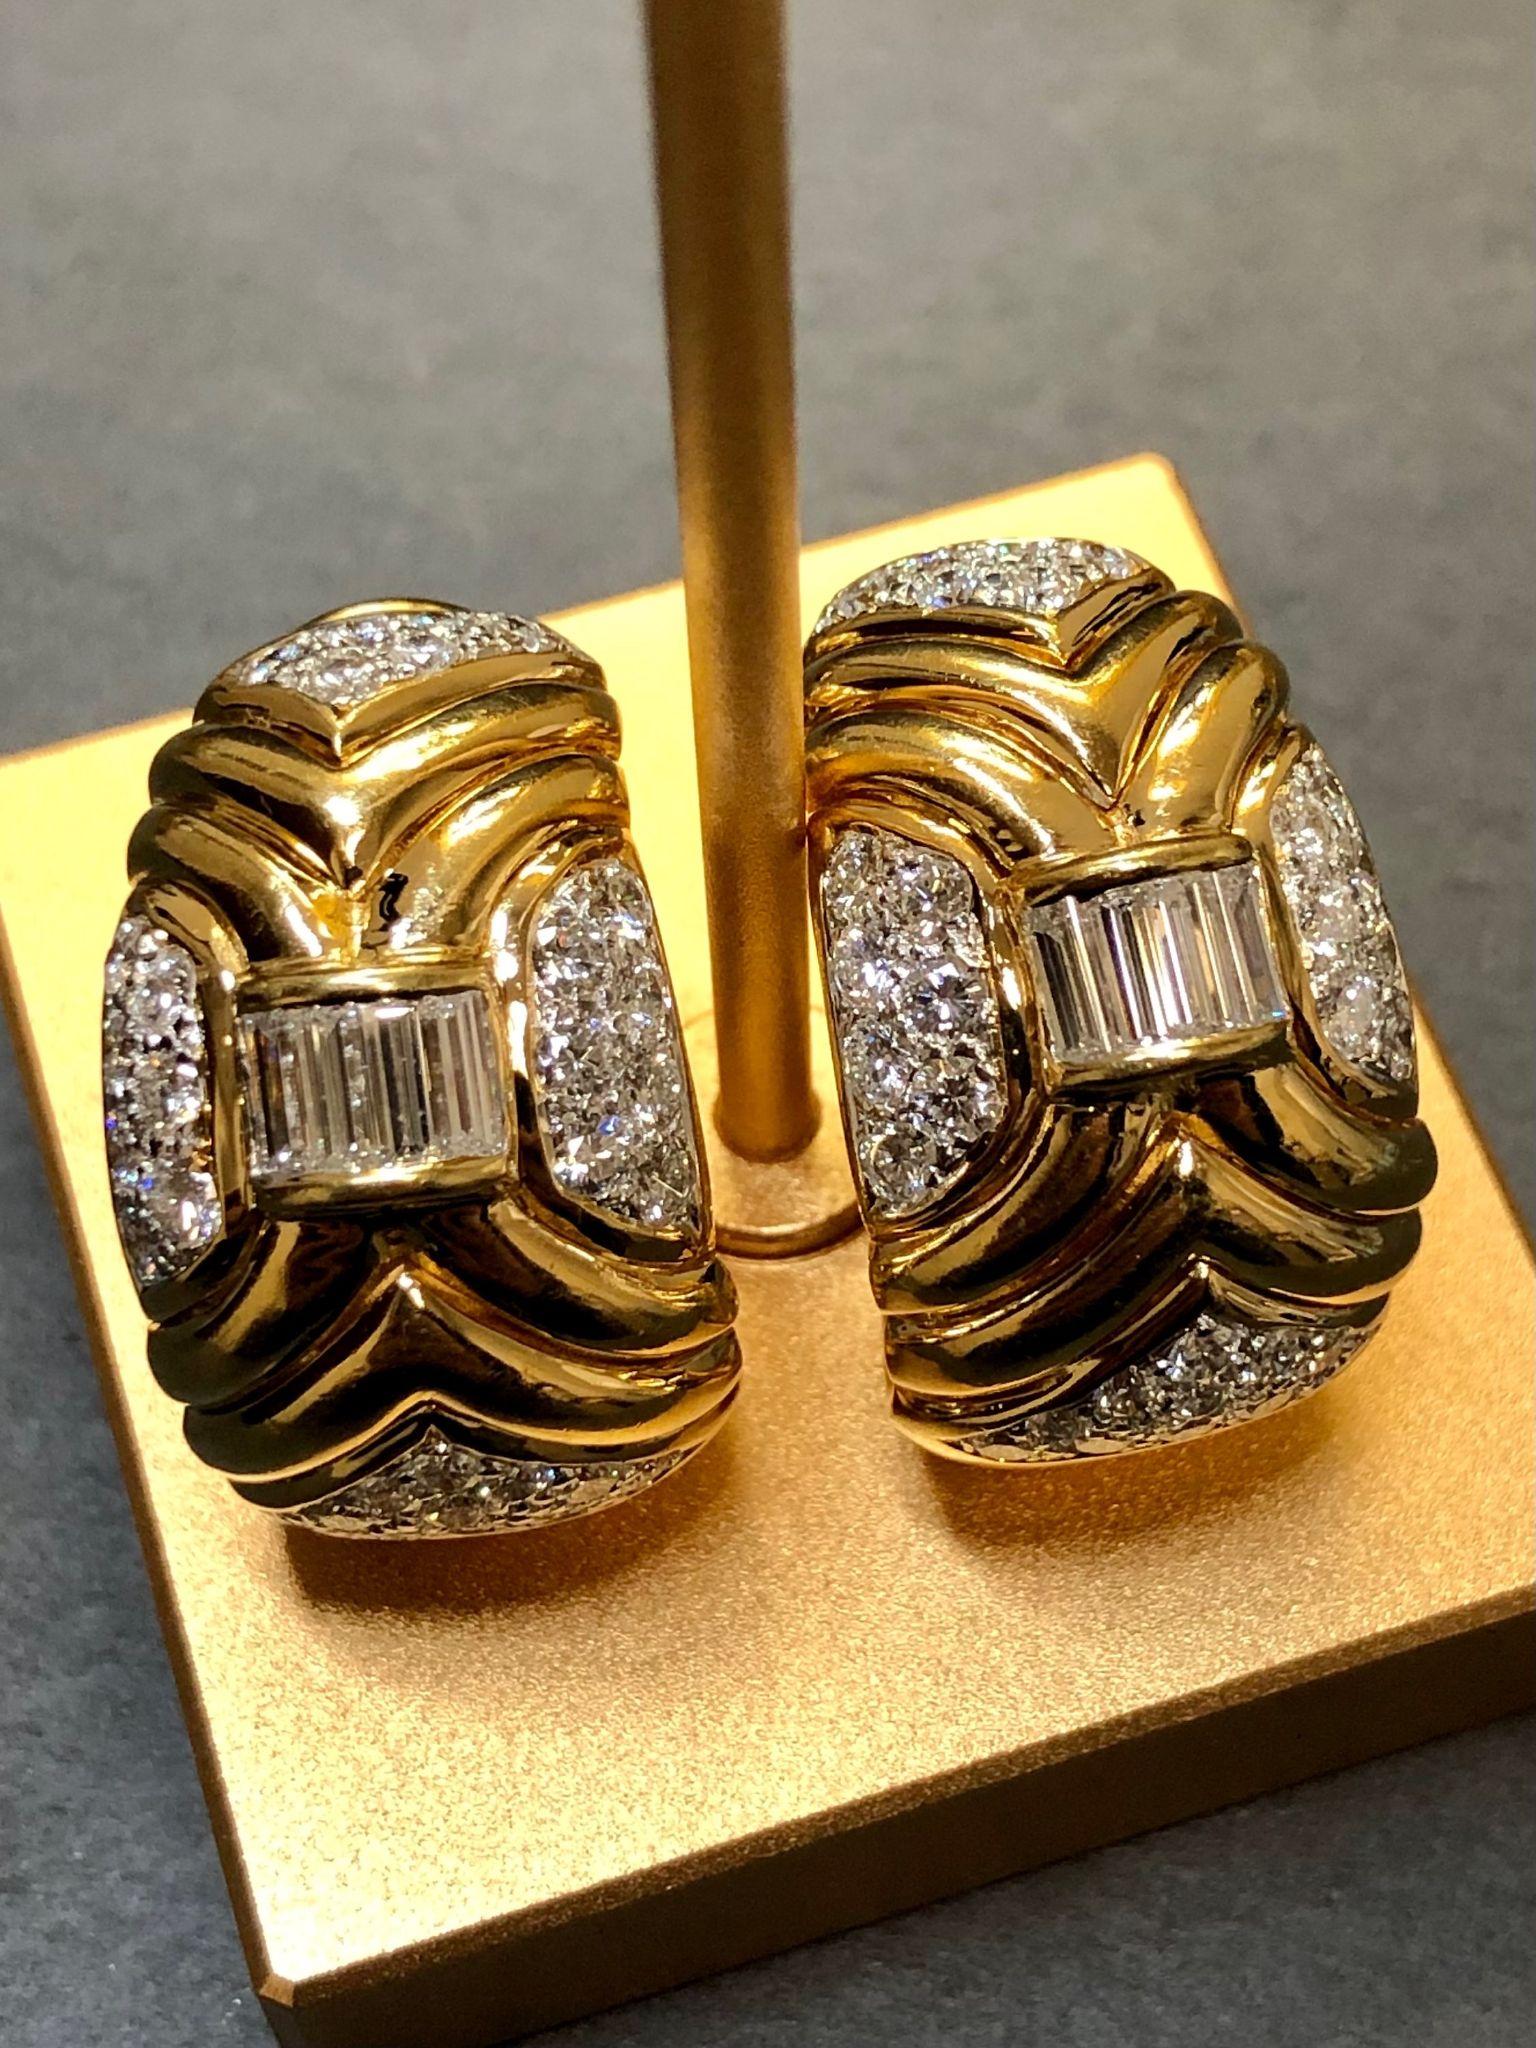 Beautifully made 18K huggie earrings channel set with large baguette and pave diamonds. Total approximate diamond weight is 4.50cttw and all stones are G-I color and Vs1-2 clarity diamonds.

Dimensions/Weight
1.1” long by .6” wide. Weighs